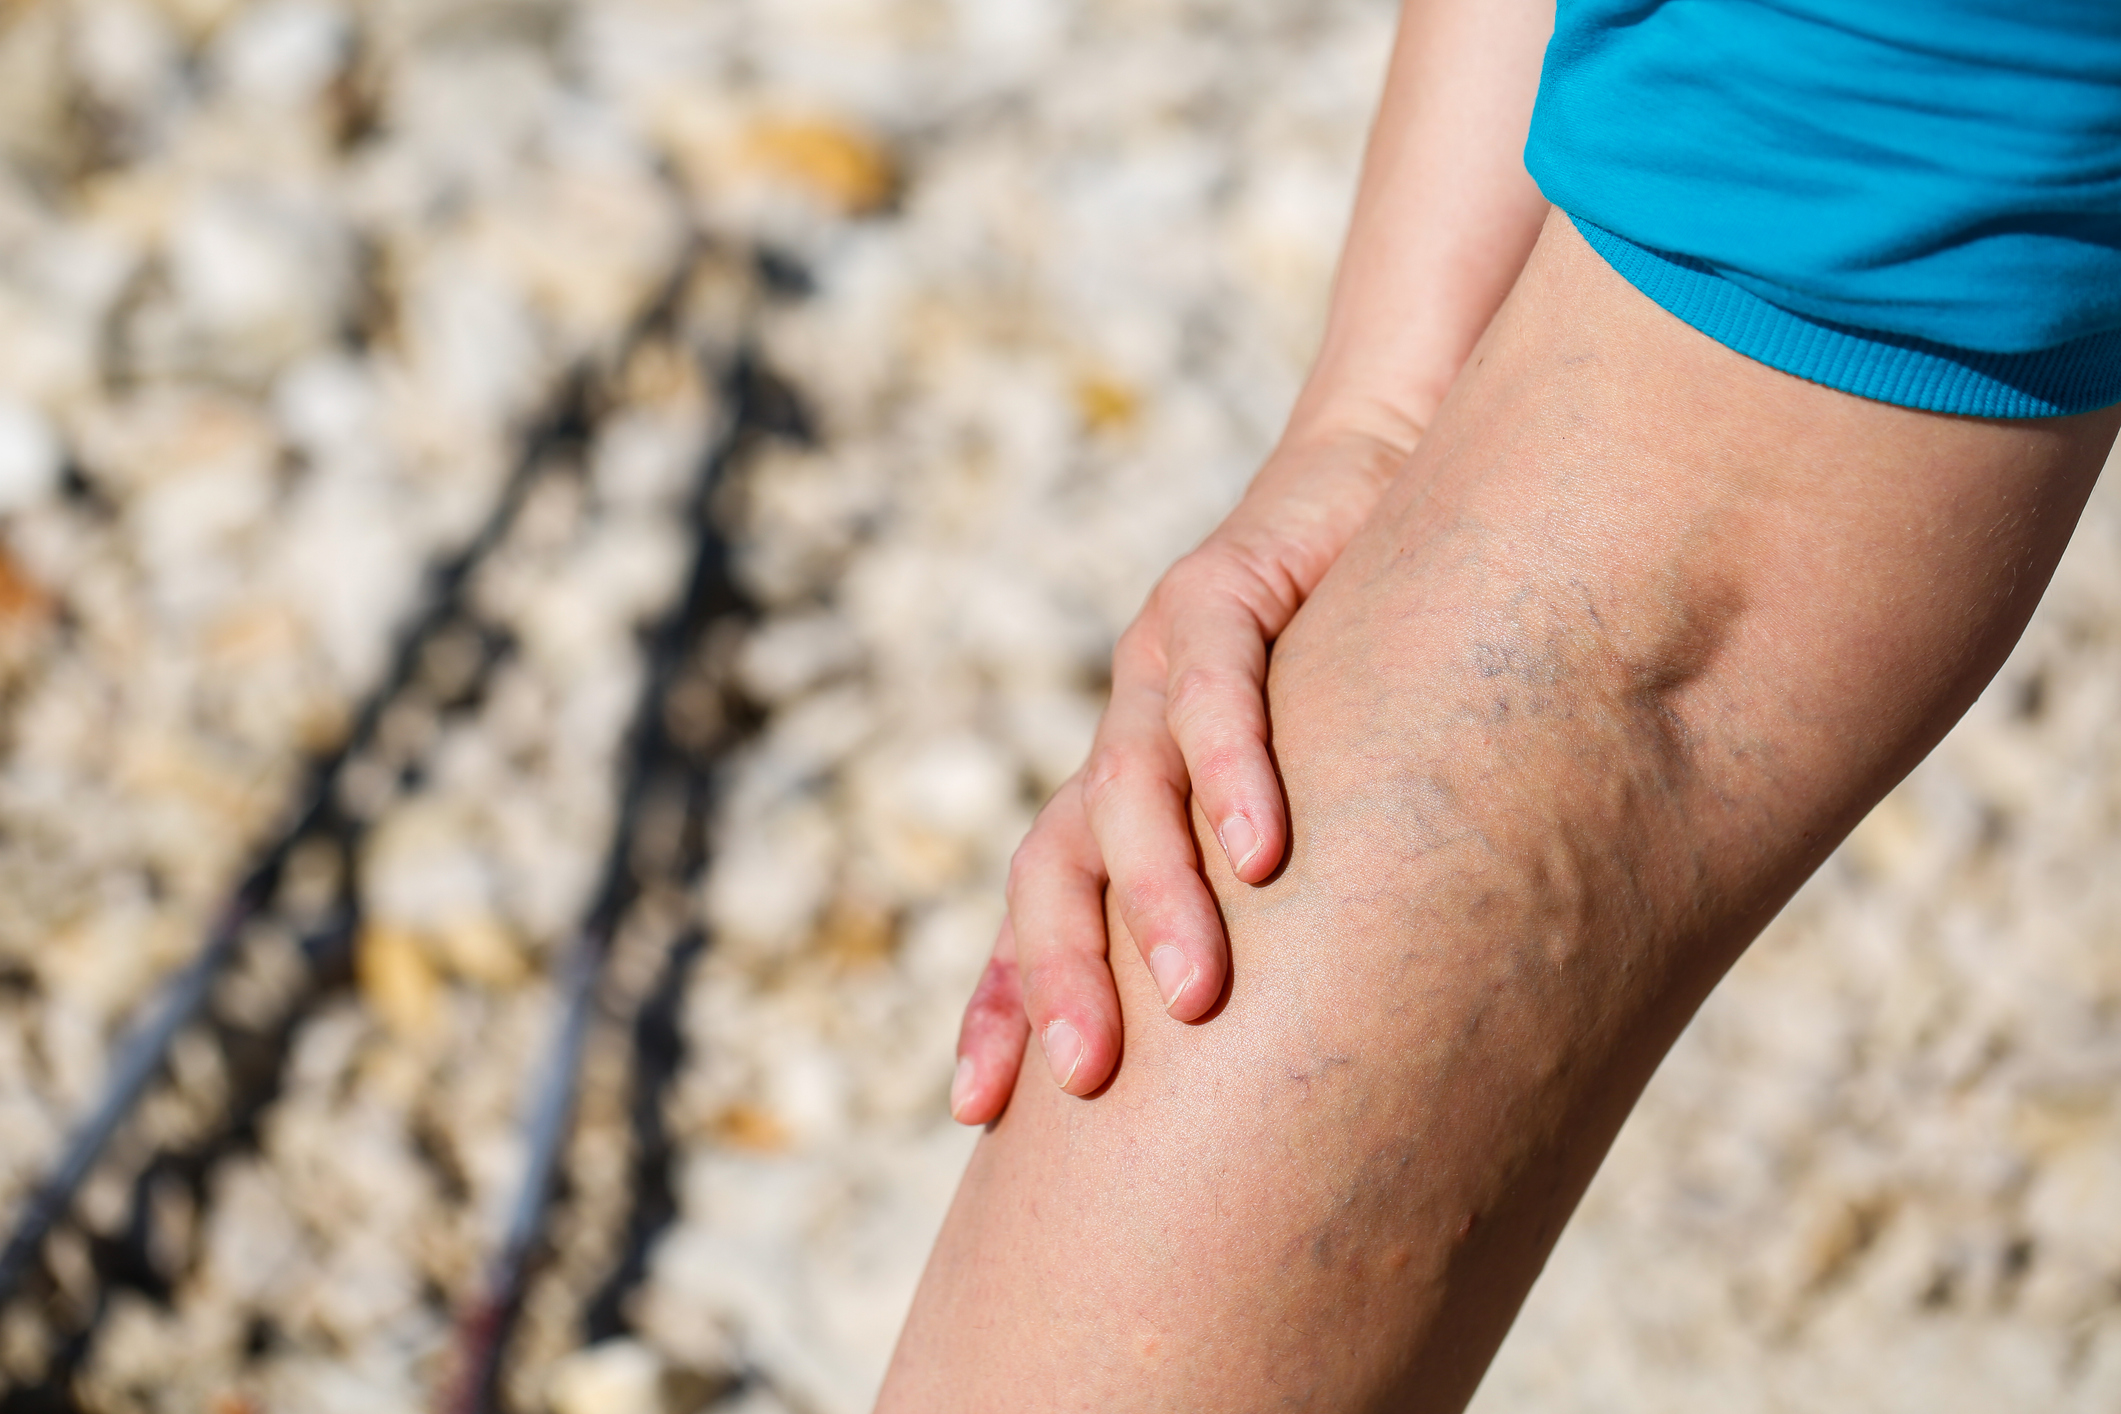 Do You Have Swelling and Pain in Your Legs? It May Be Deep Vein Thrombosis.